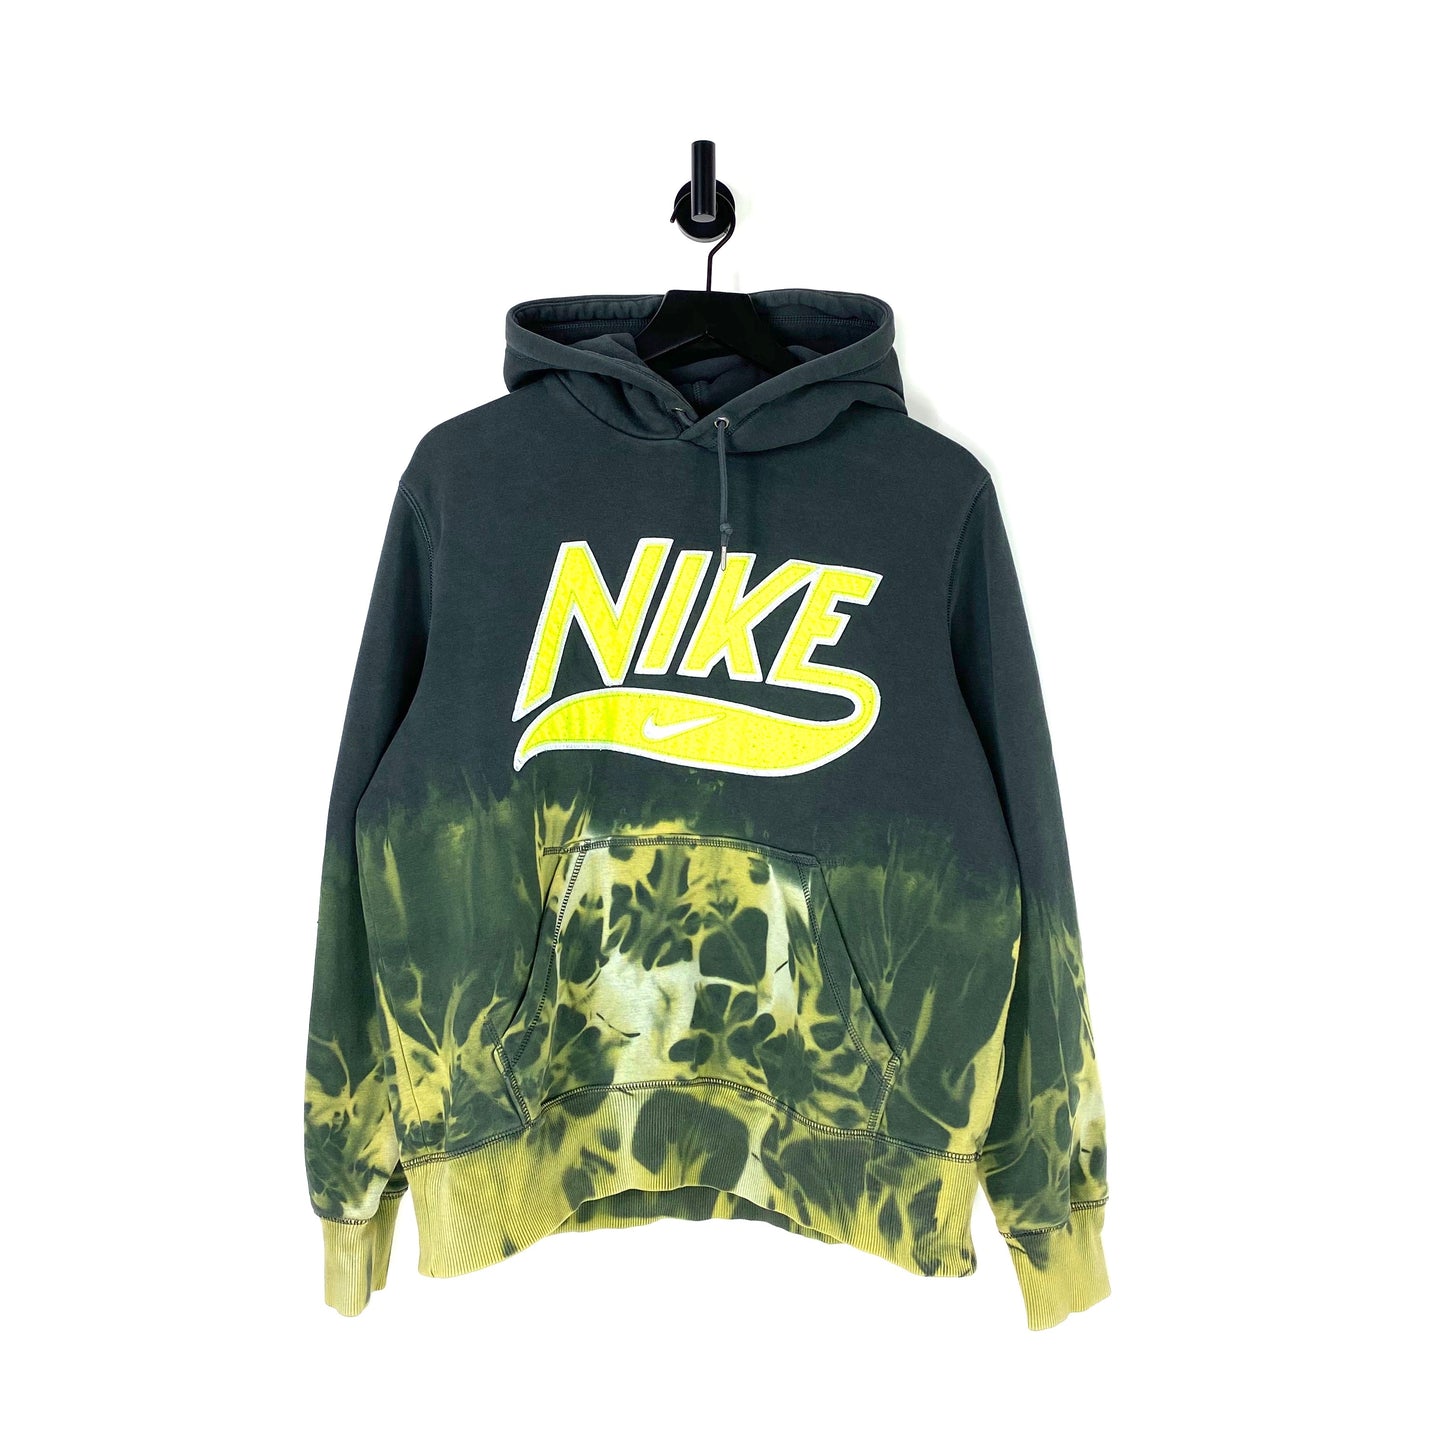 Nike Pull Over - M